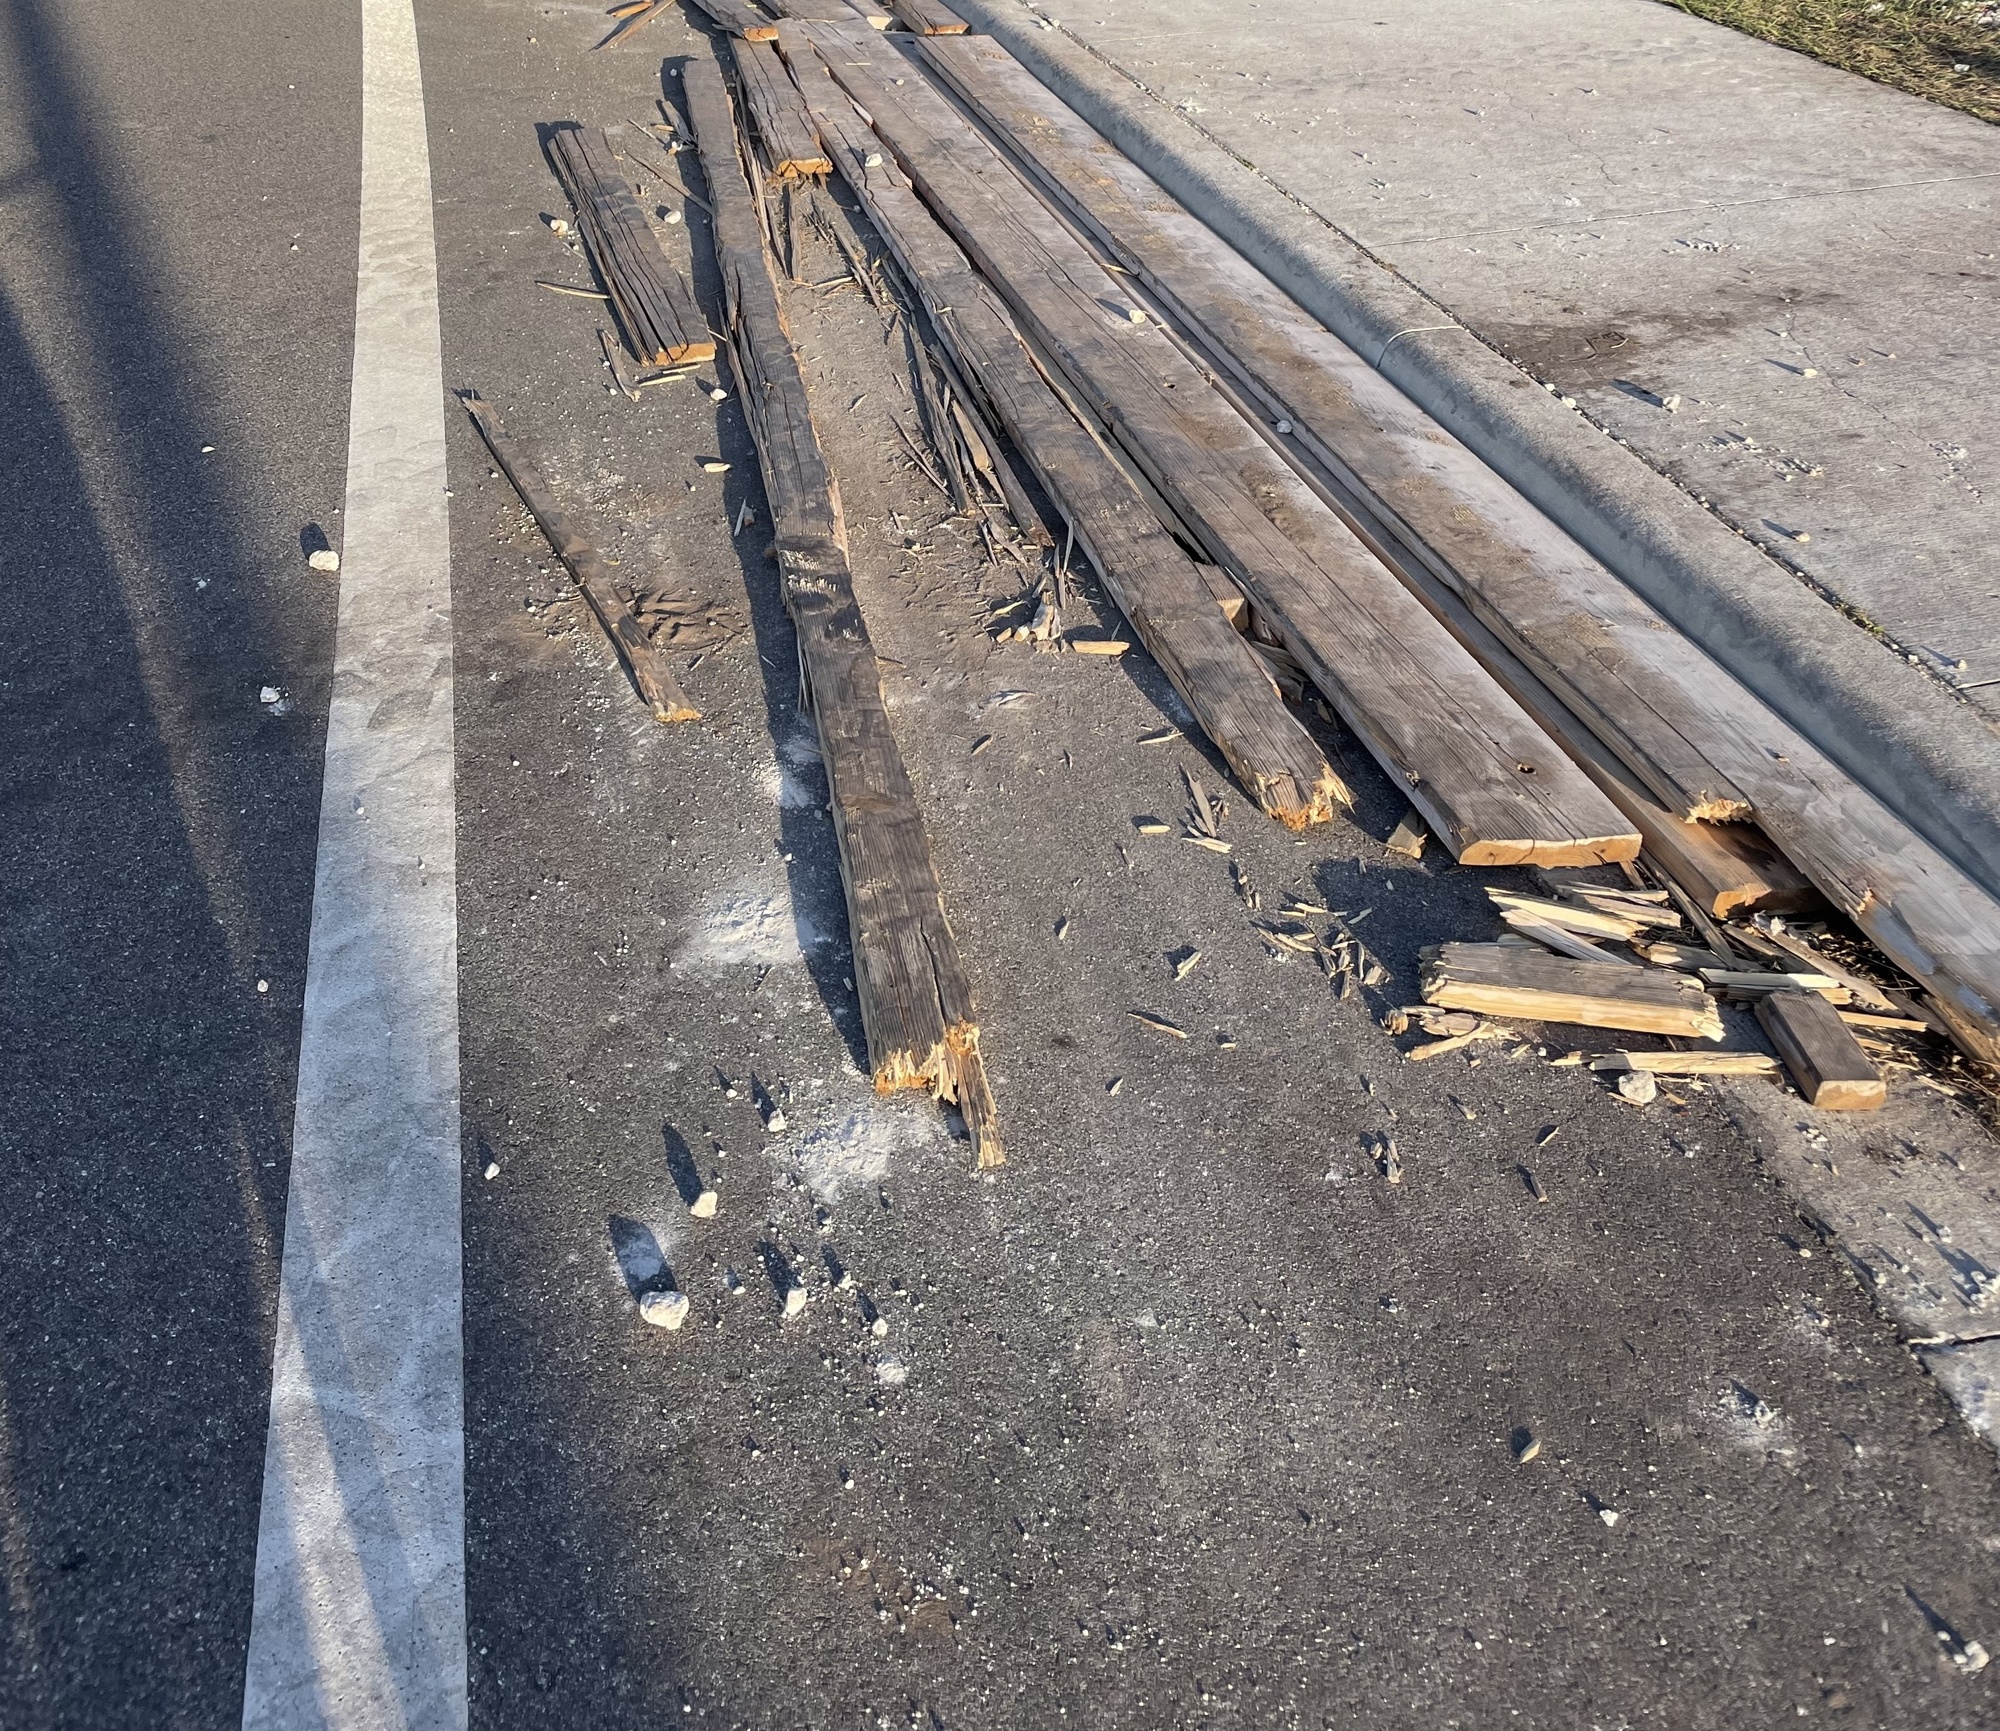 Rich Weinstock said that on the morning of April 20, he saw this series of boards in the bike lane on the far south length of Lakewood Ranch Boulevard near the roundabouts. Courtesy photo.